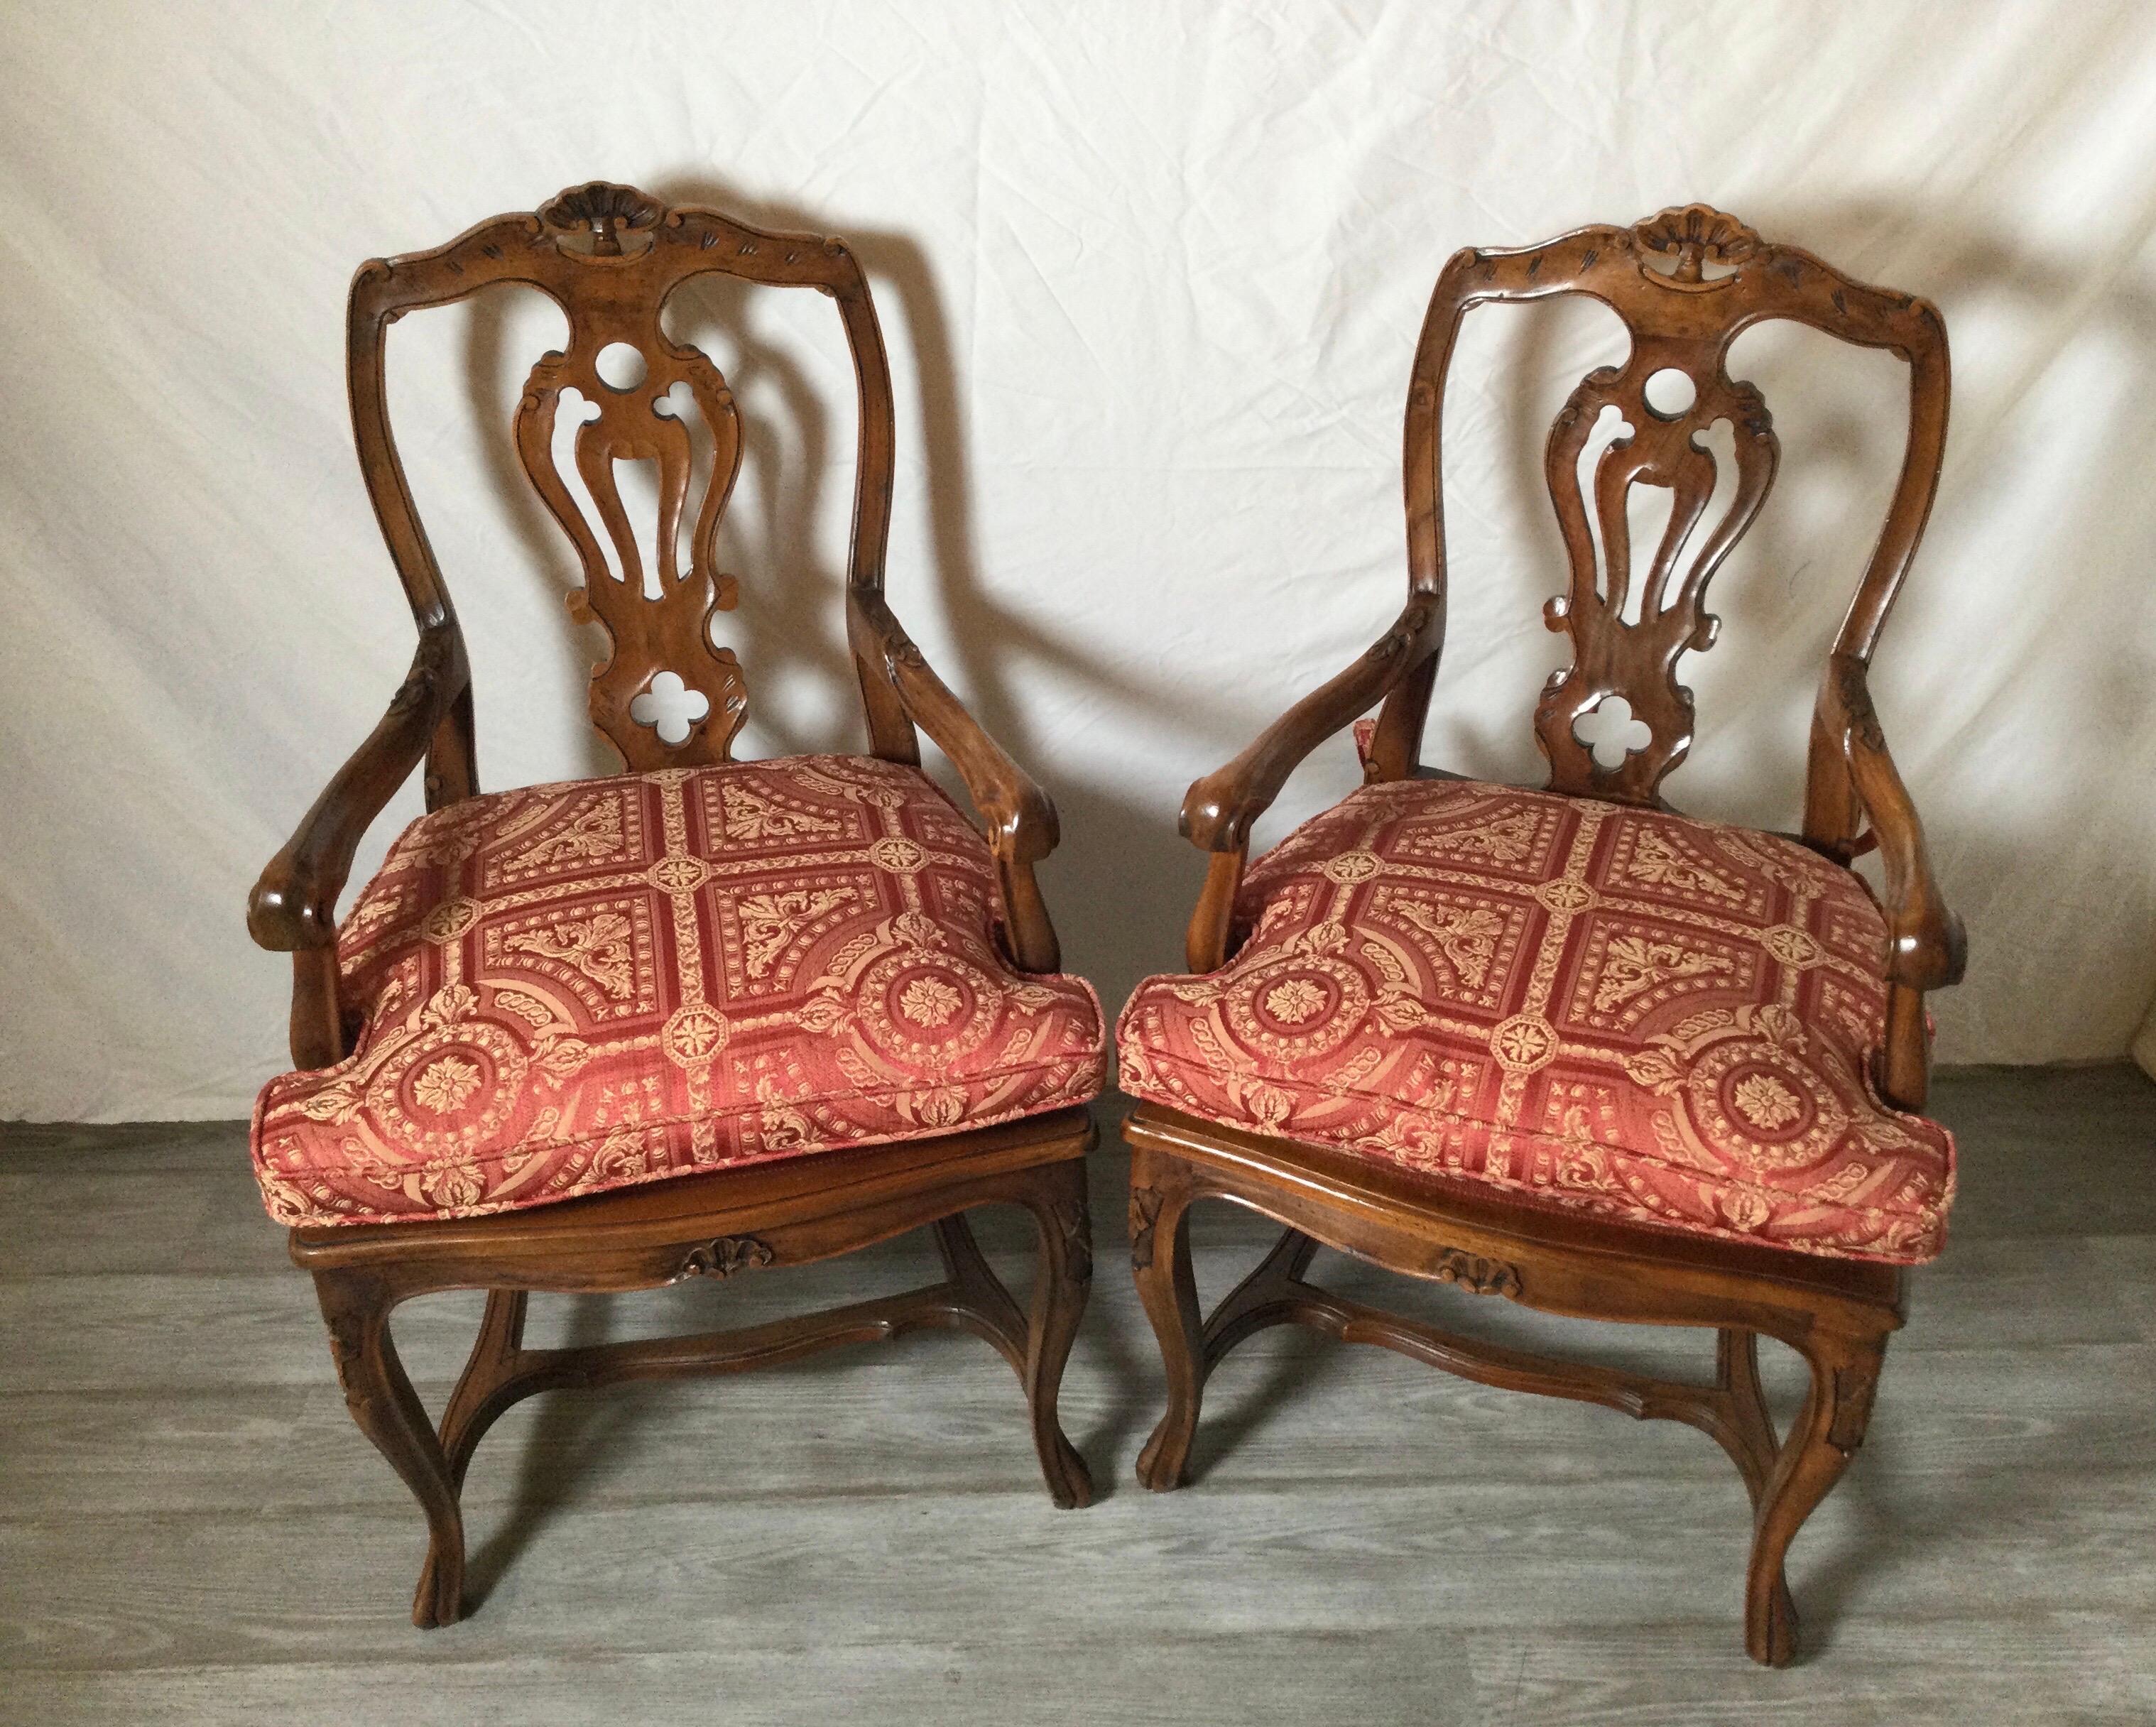 A beautiful pair of hand carved walnut chairs with new custom seat cushions. The shapely backs with open splats and open hand carved arms. The bases with a well crafted stretcher supporting gently curved legs in the French taste but made in Italy